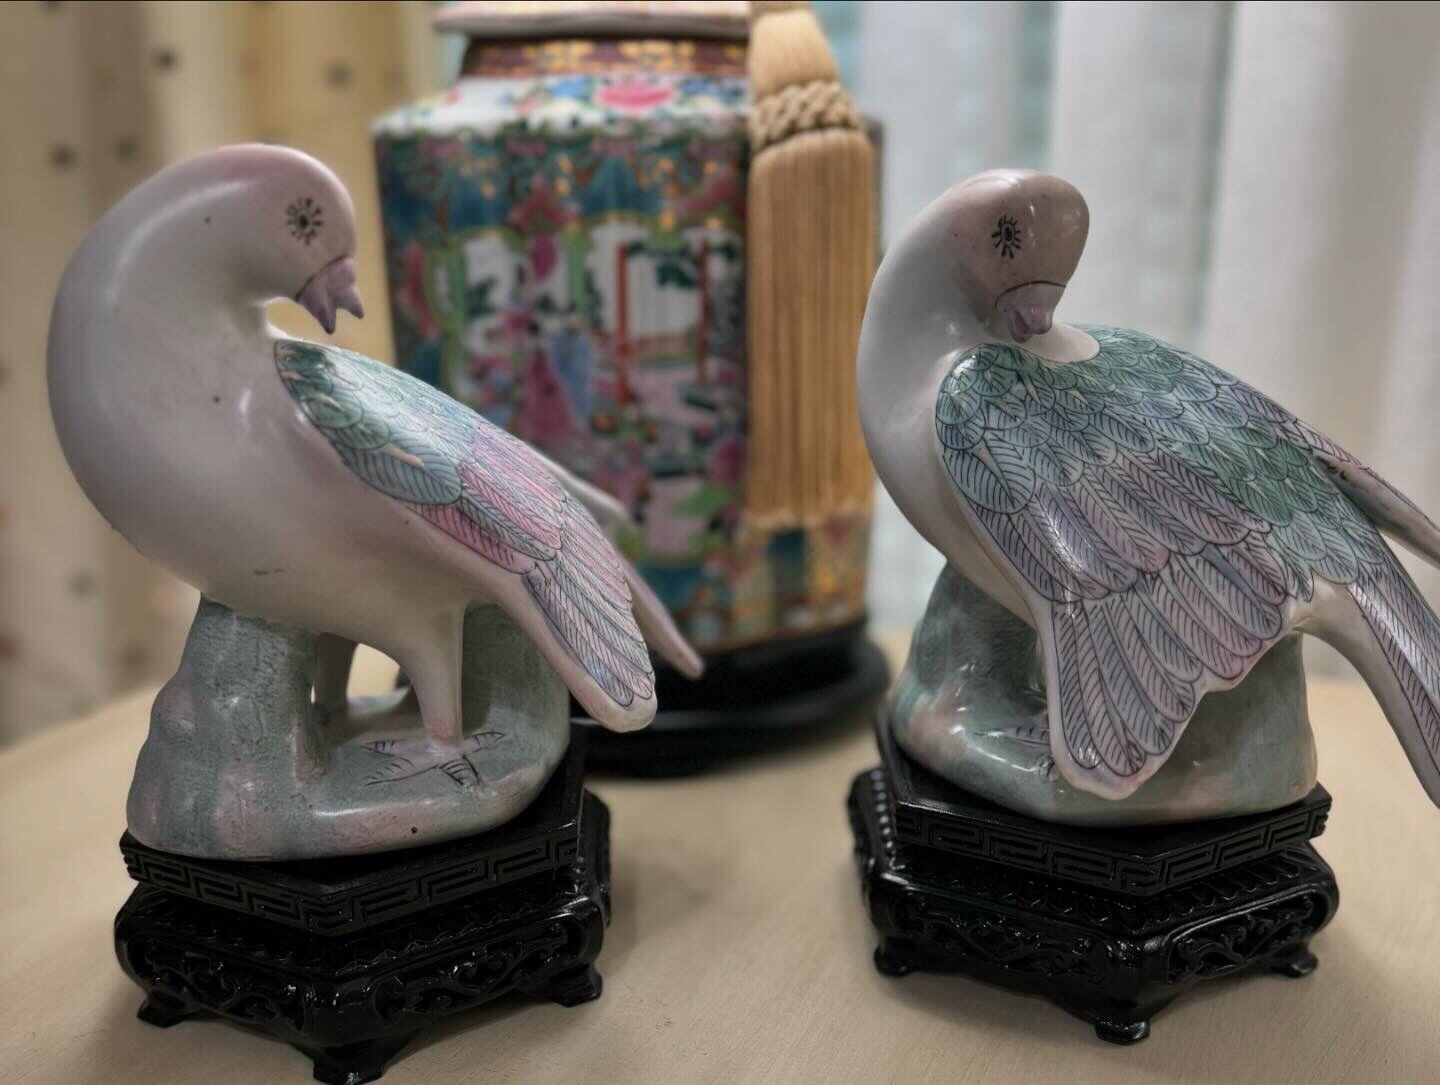 2 Porcelain Hand Painted Dove Figurines 1950’s Vtg WBI China.